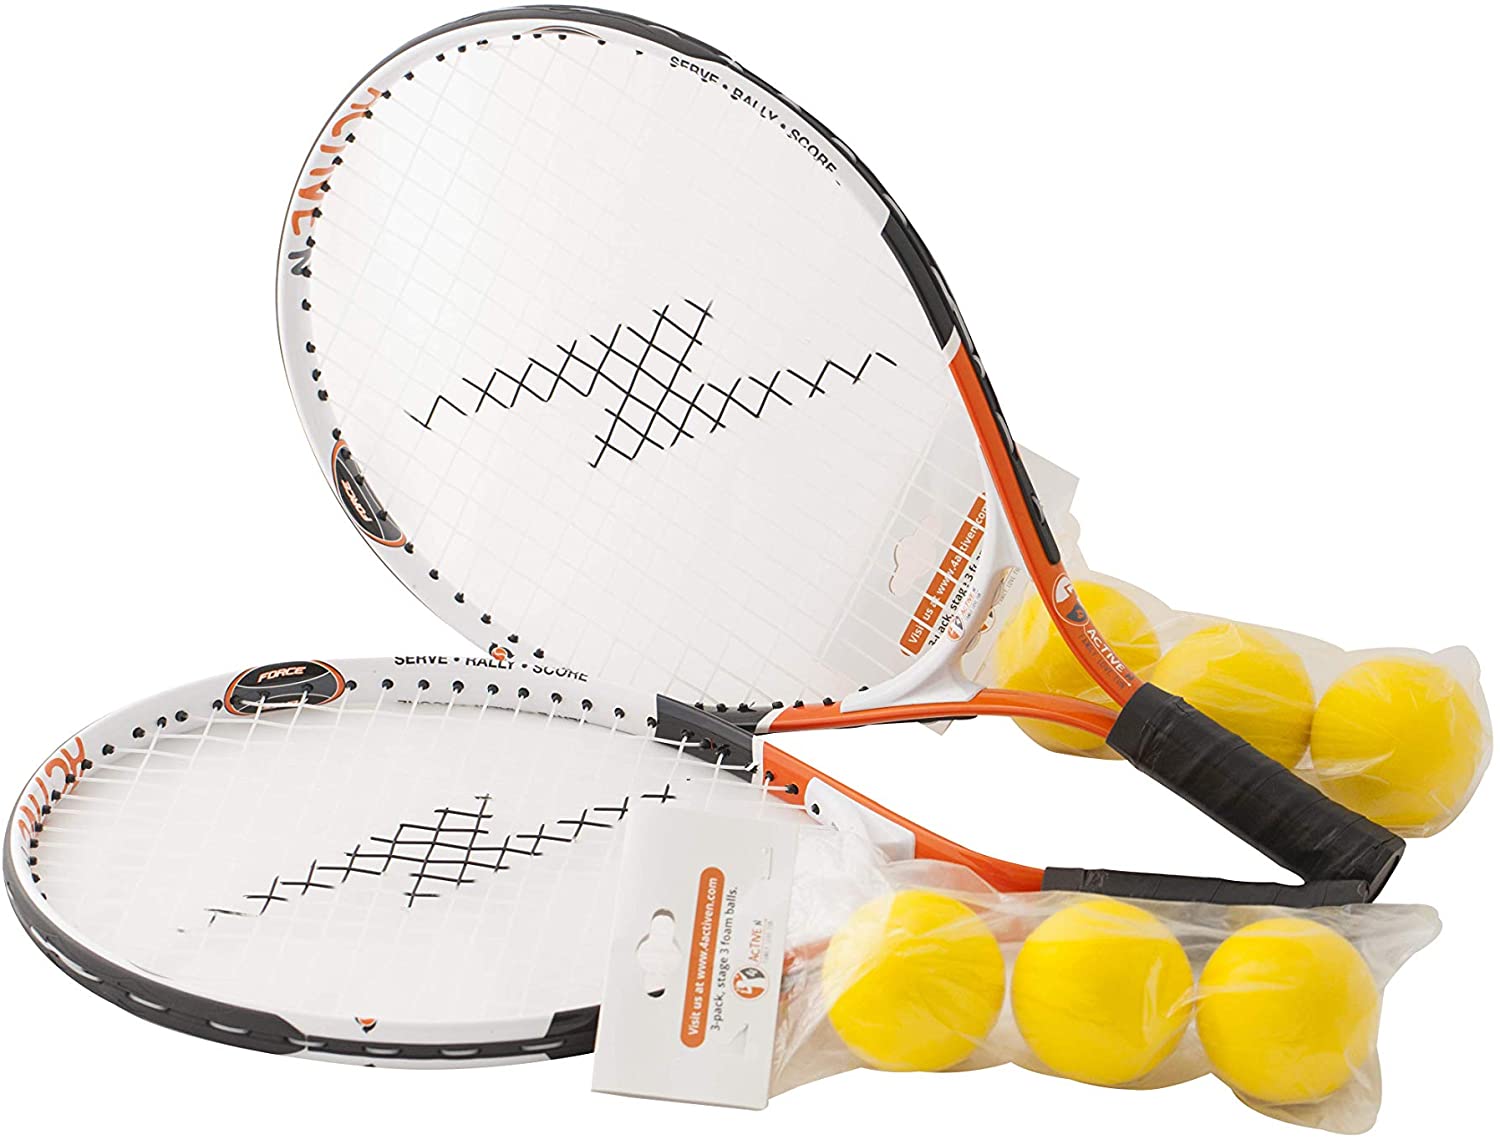 4 active n Tennis Racket for Kids, Fun for Children Ages 2-8, Includes Kids Tennis Racket and 3 Foam Tennis Balls